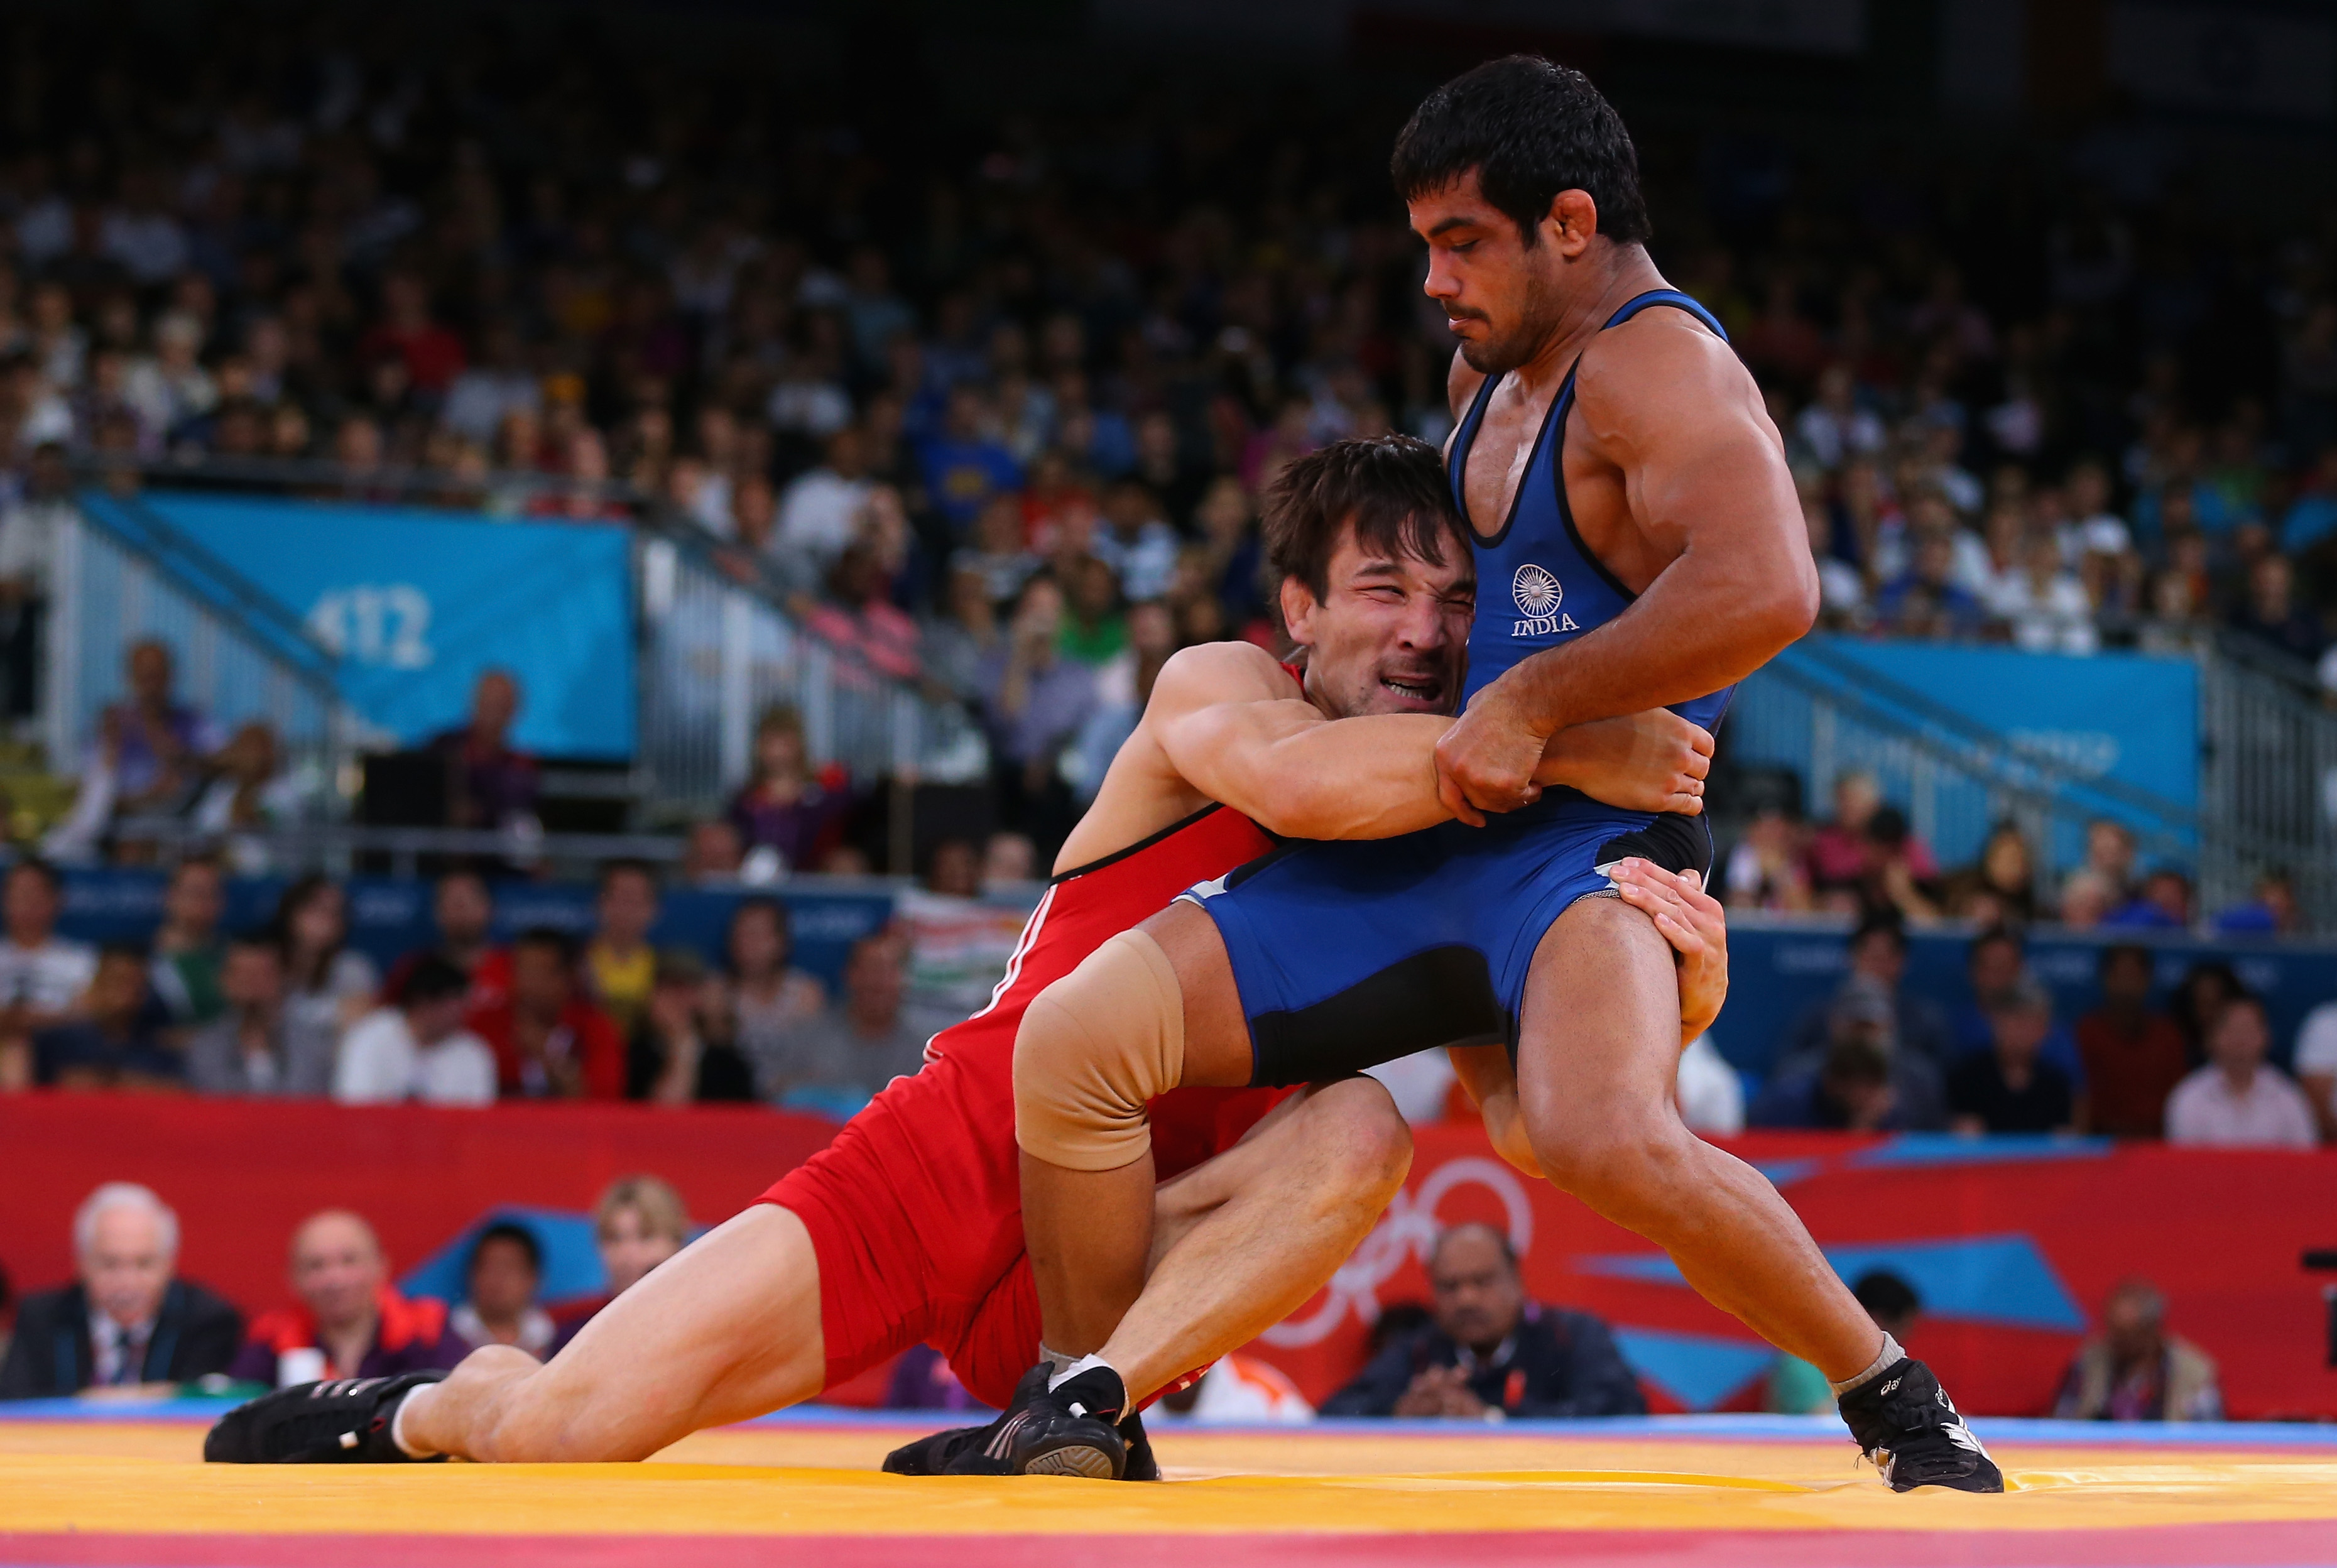 Has Sushil Kumar forced himself into a downward spiral from which he cannot recover?